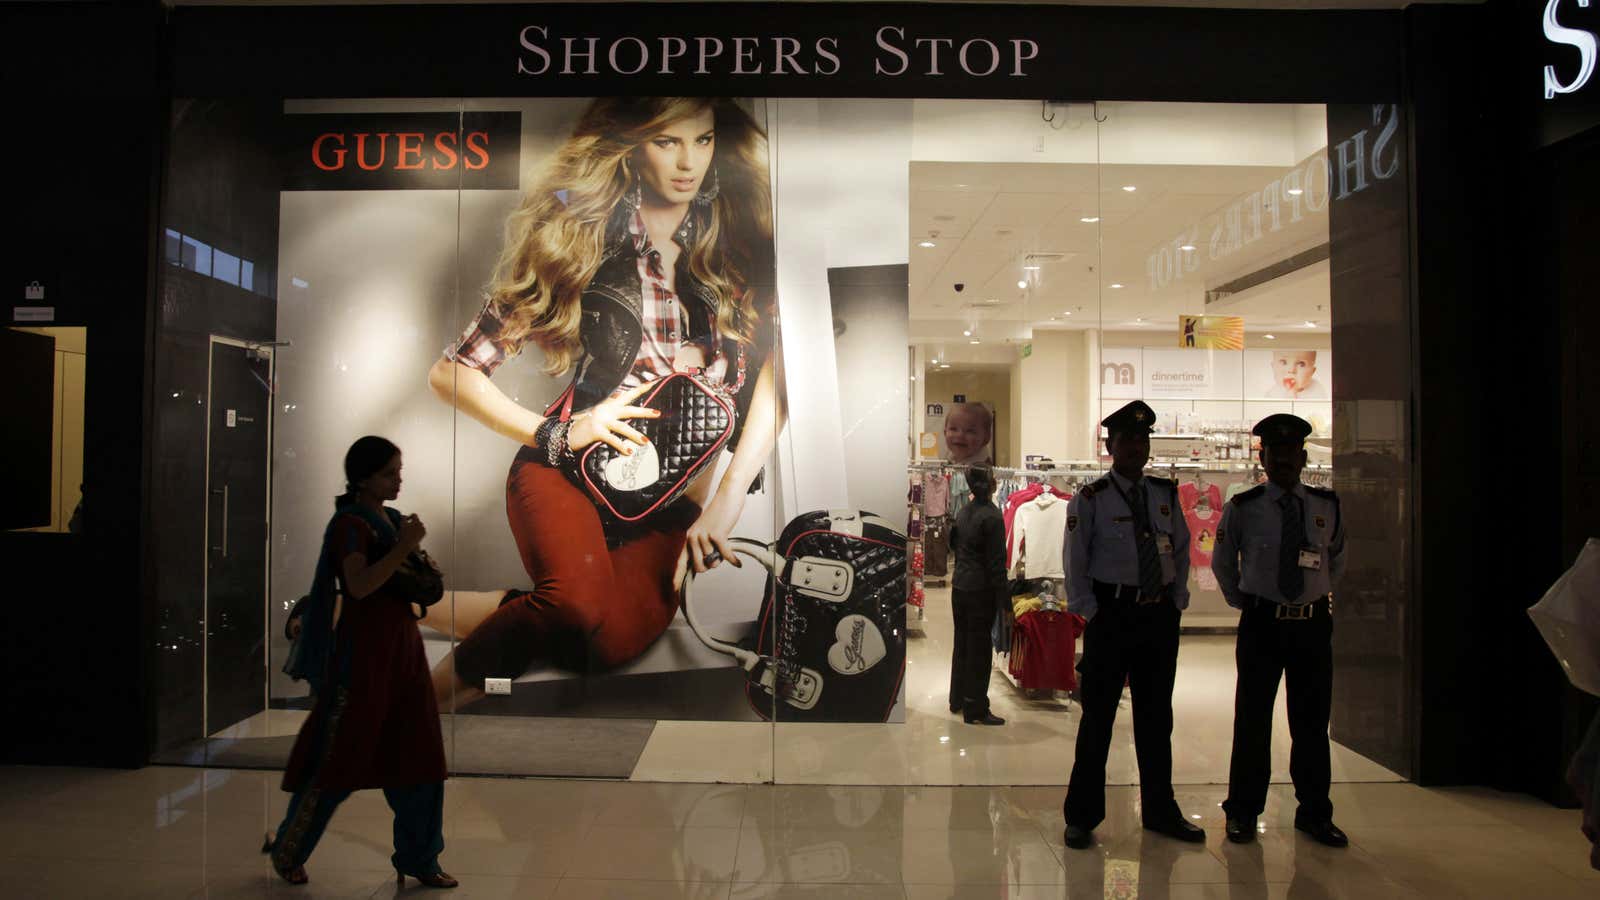 A decade ago during India’s rising economy, malls began popping up in cities across the country.